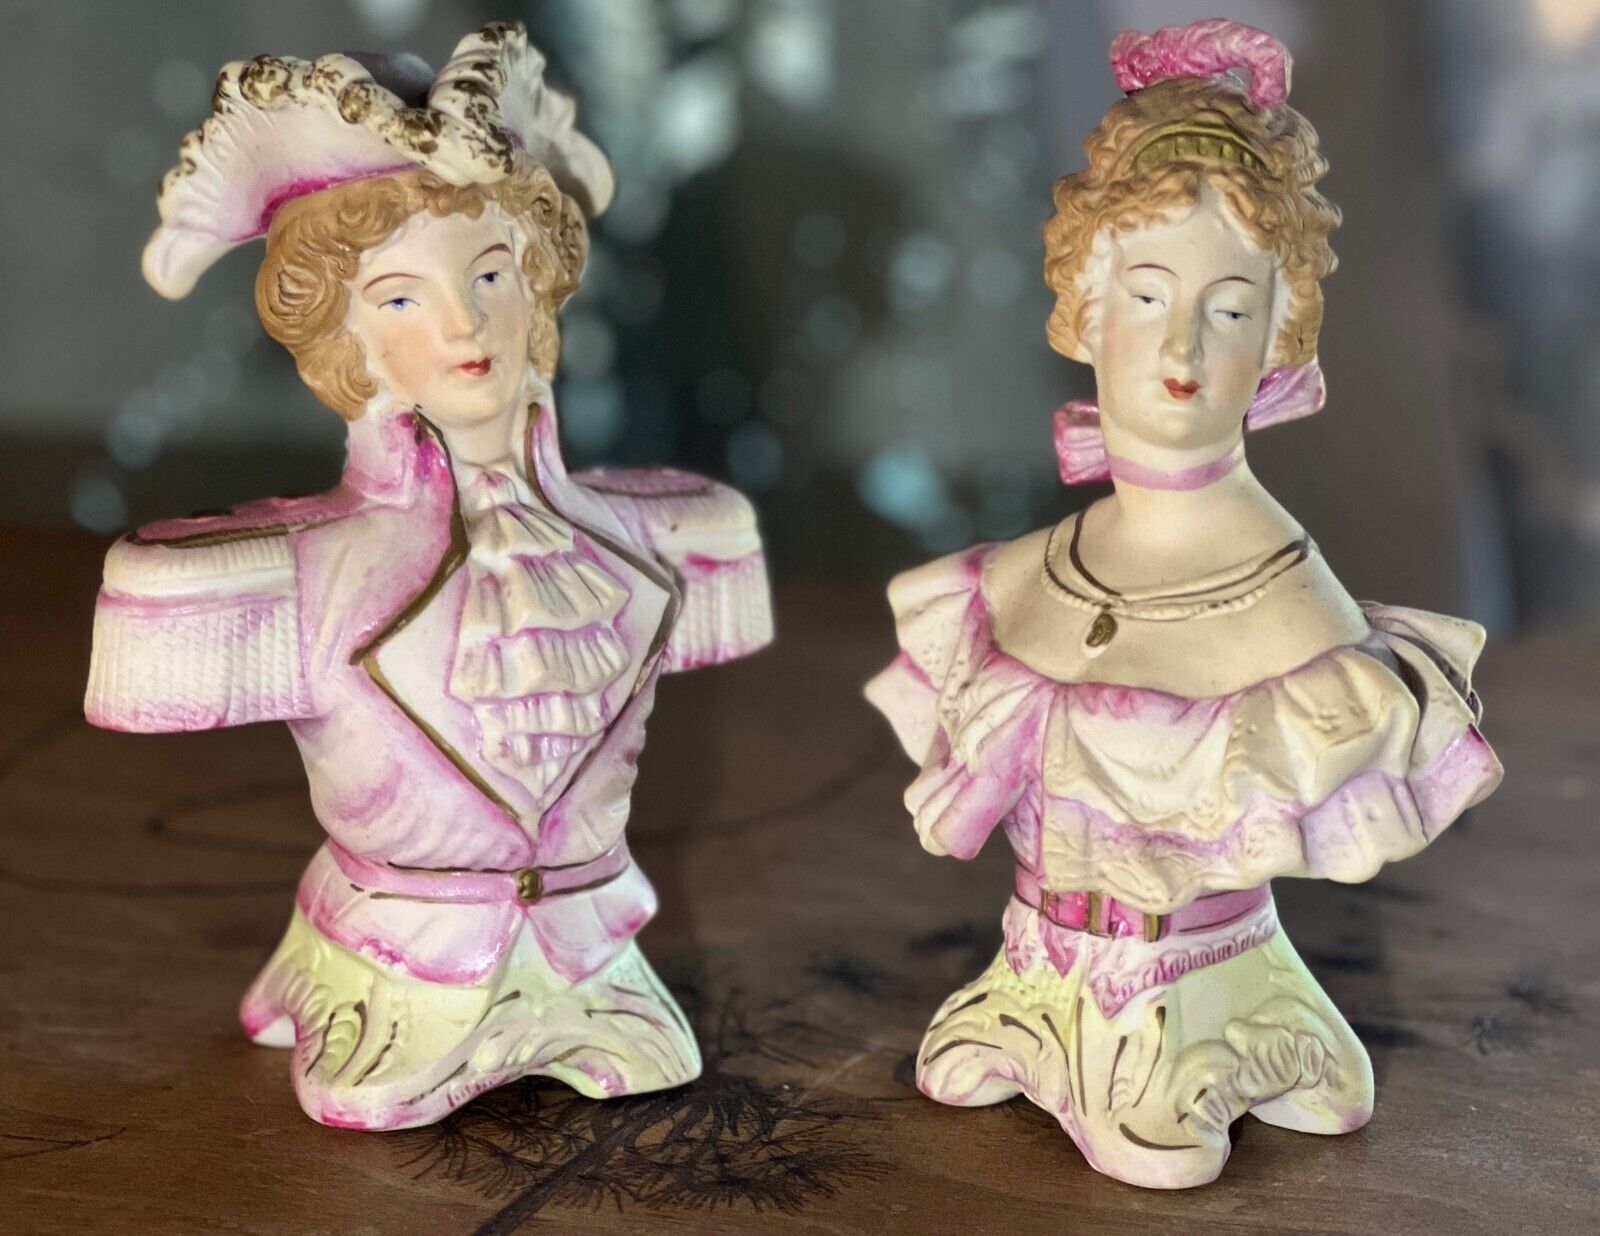 Vintage Bisque Victorian Lady and Gentleman Bust Statues Halsey Import Co. 1953